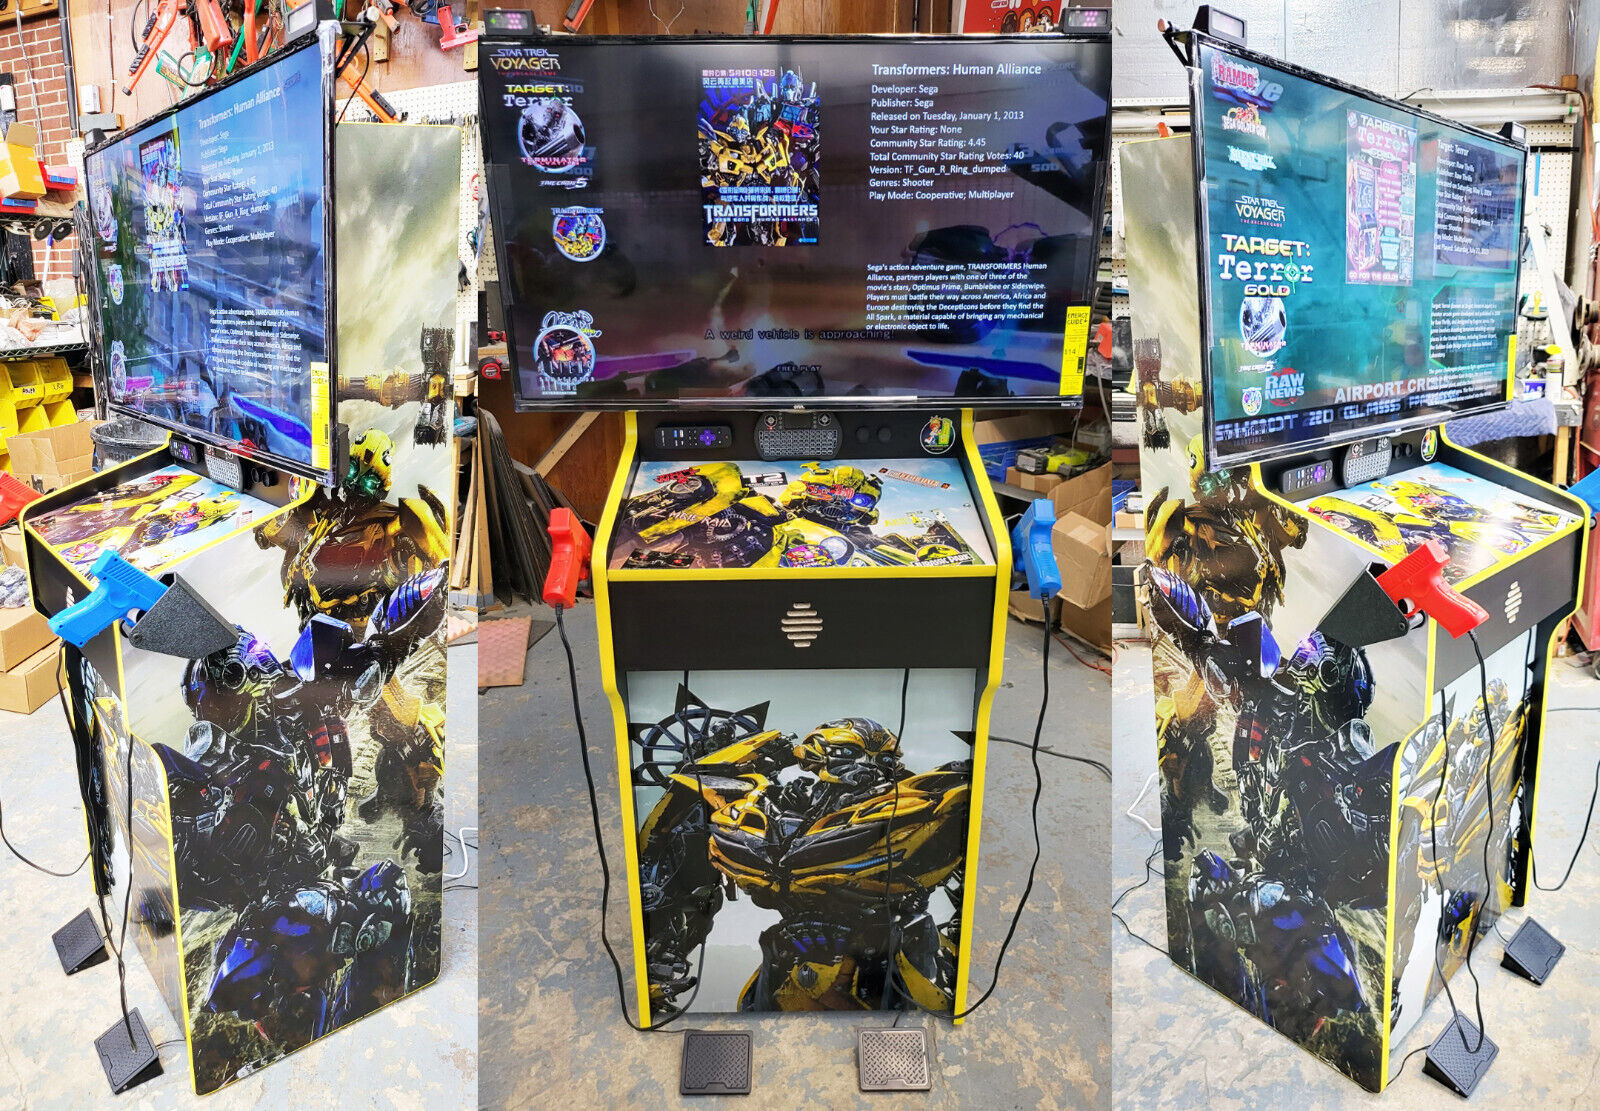 Transformers MULTICADE SHOOTER Arcade Game Multi Full Size NEW 240 Games 42\